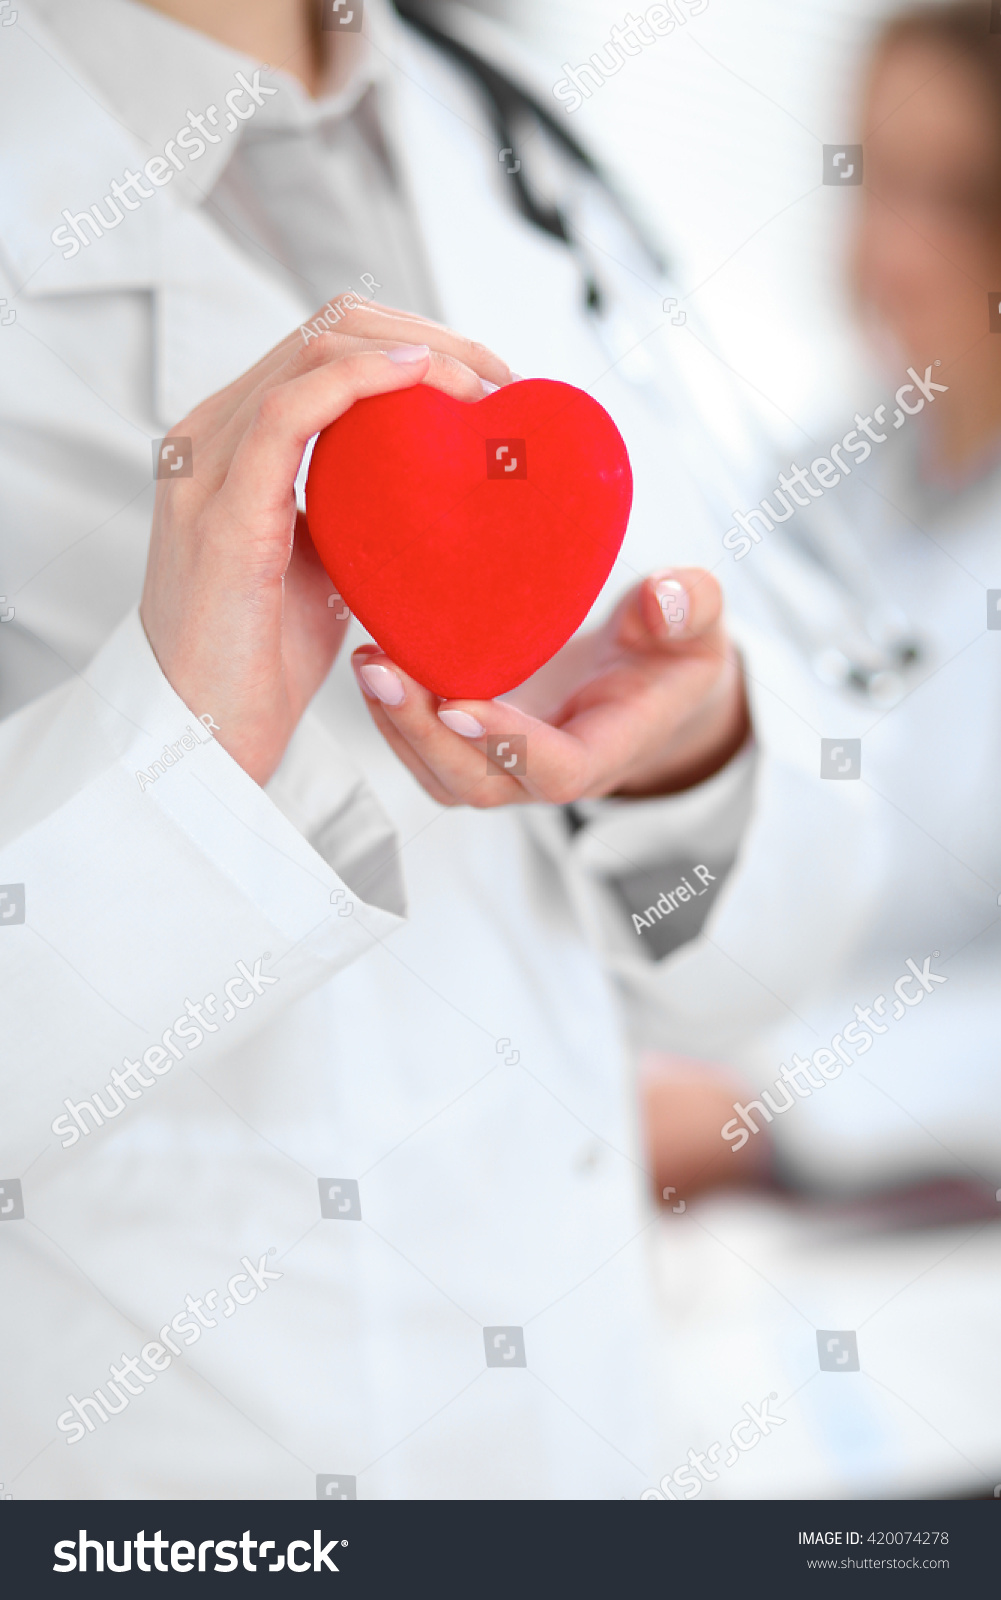 Female doctor with stethoscope holding heart.  Patients couple sitting in the background #420074278